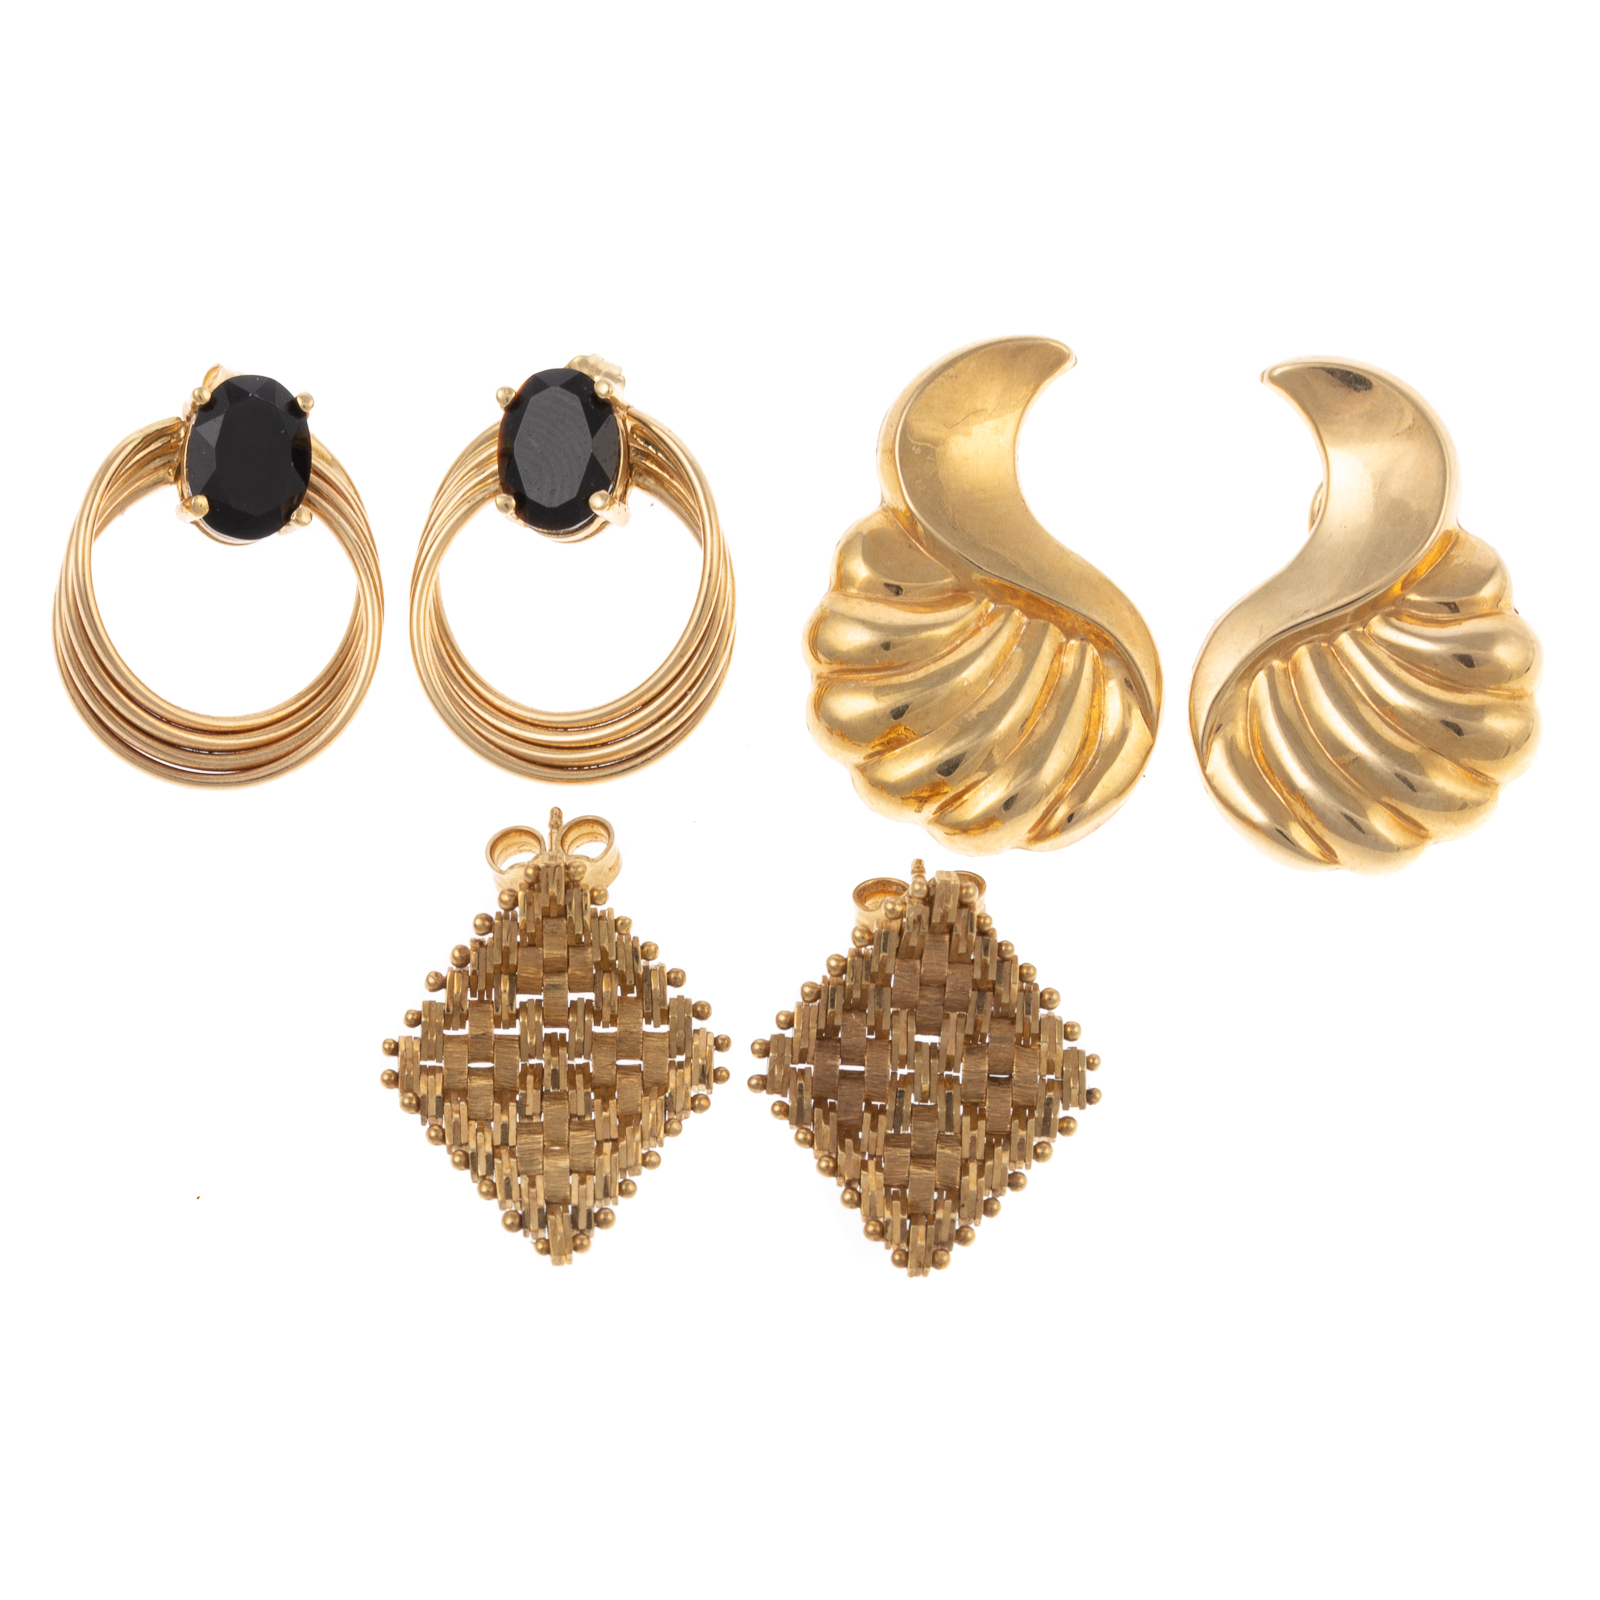 A TRIO OF 14K YELLOW GOLD EARRINGS